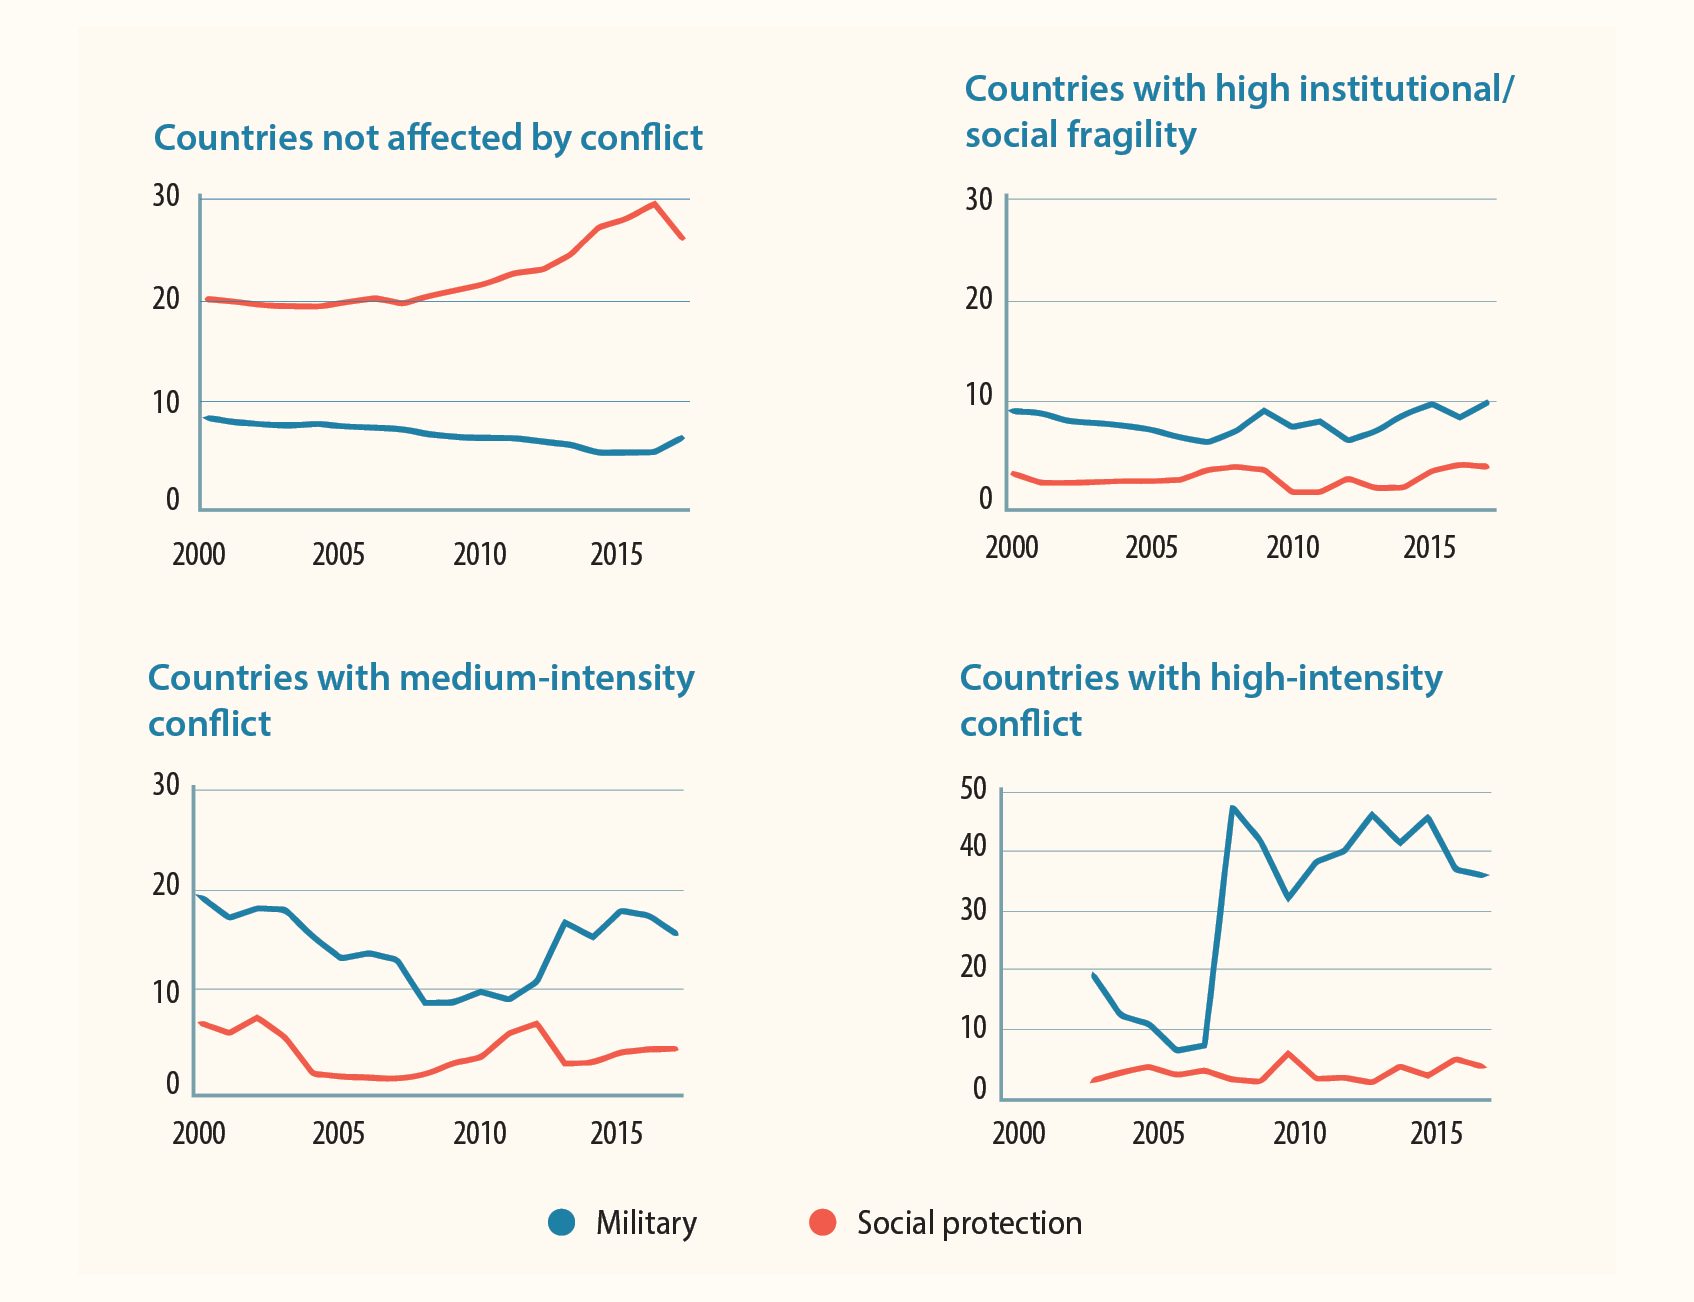 Four line graphs showing the percentage of spending in (a) countries not affected by conflict, (b) countries with high institutional/social fragility, (c) countries with medium-intensity conflict, and (d) countries with high-intensity-conflict.